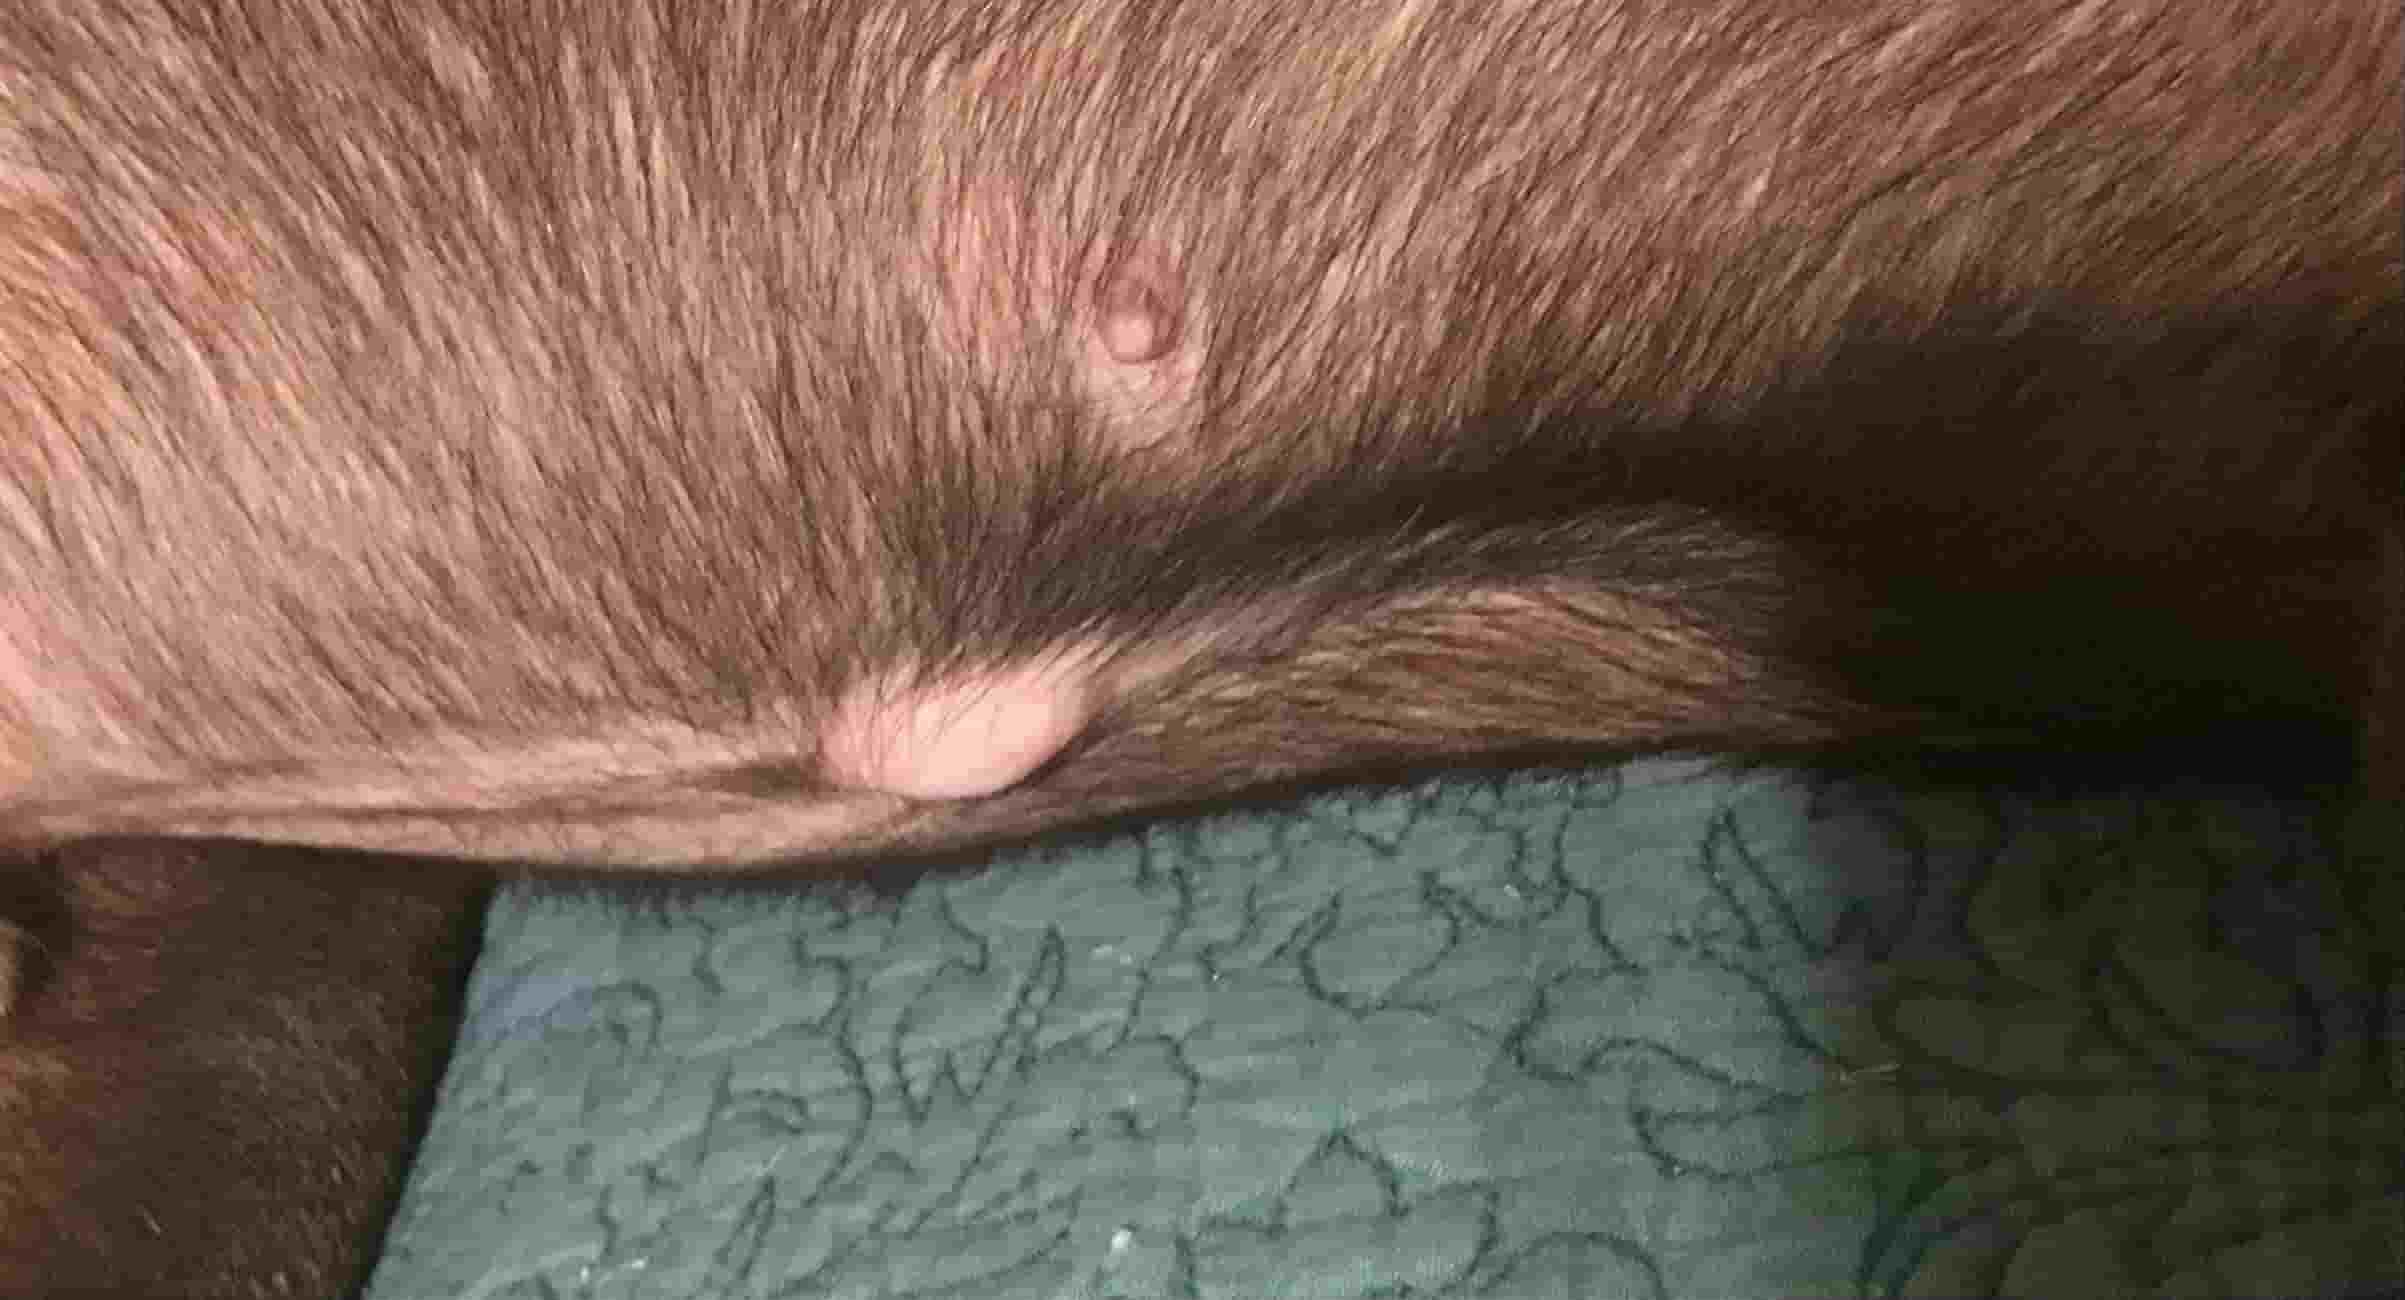 My dog has bumps under her fur. What is the cause and treatment